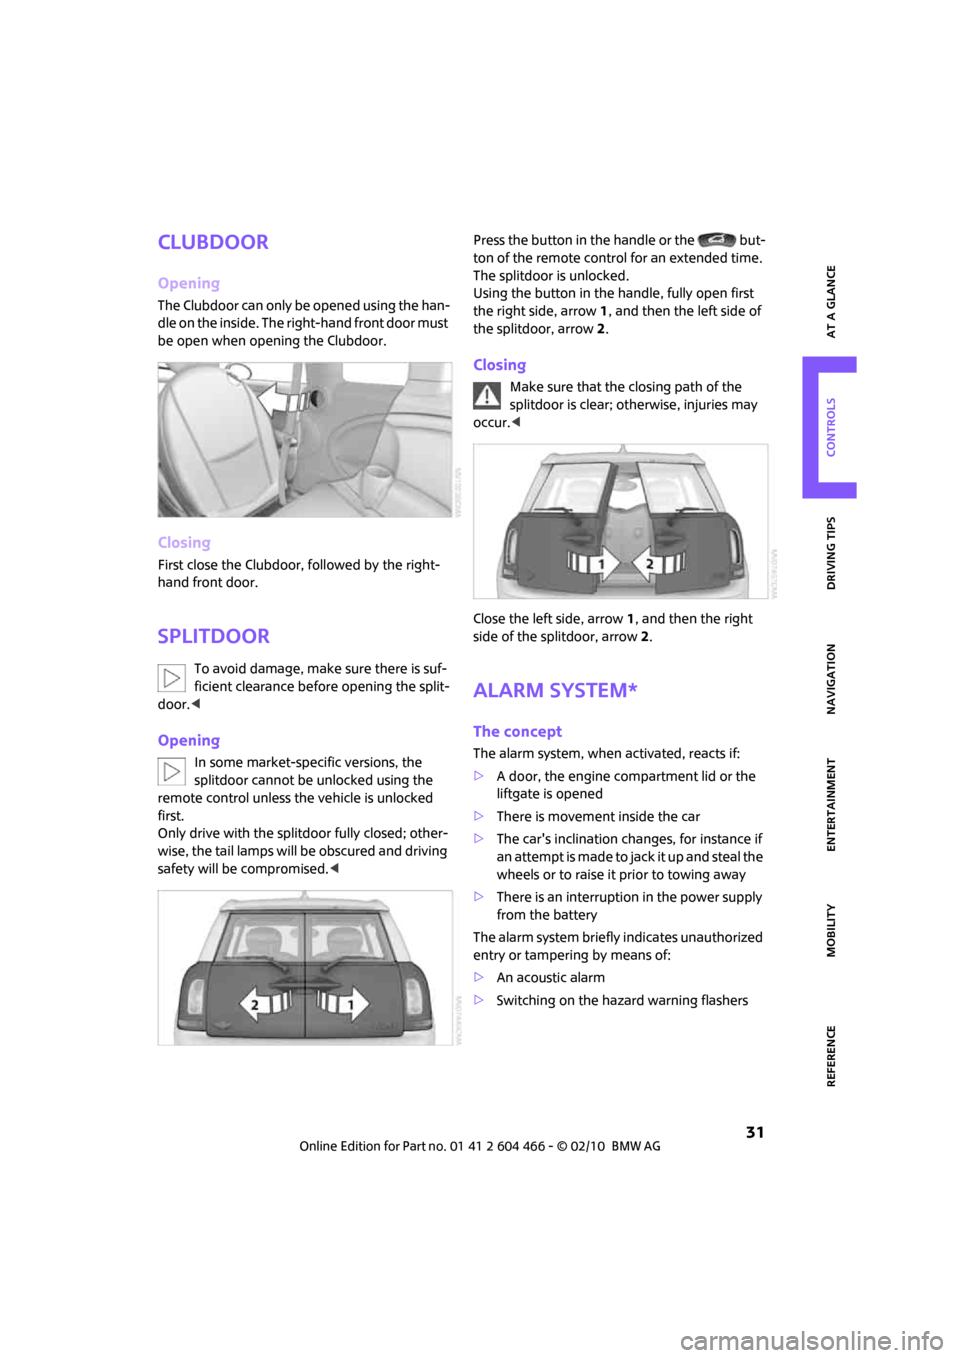 MINI Clubman 2010  Owners Manual (Mini Connected) MOBILITYAT A GLANCE CONTROLS DRIVING TIPS ENTERTAINMENT
 31
NAVIGATION REFERENCE
Clubdoor
Opening
The Clubdoor can only be opened using the han-
dle on the inside. The right-hand front door must 
be o